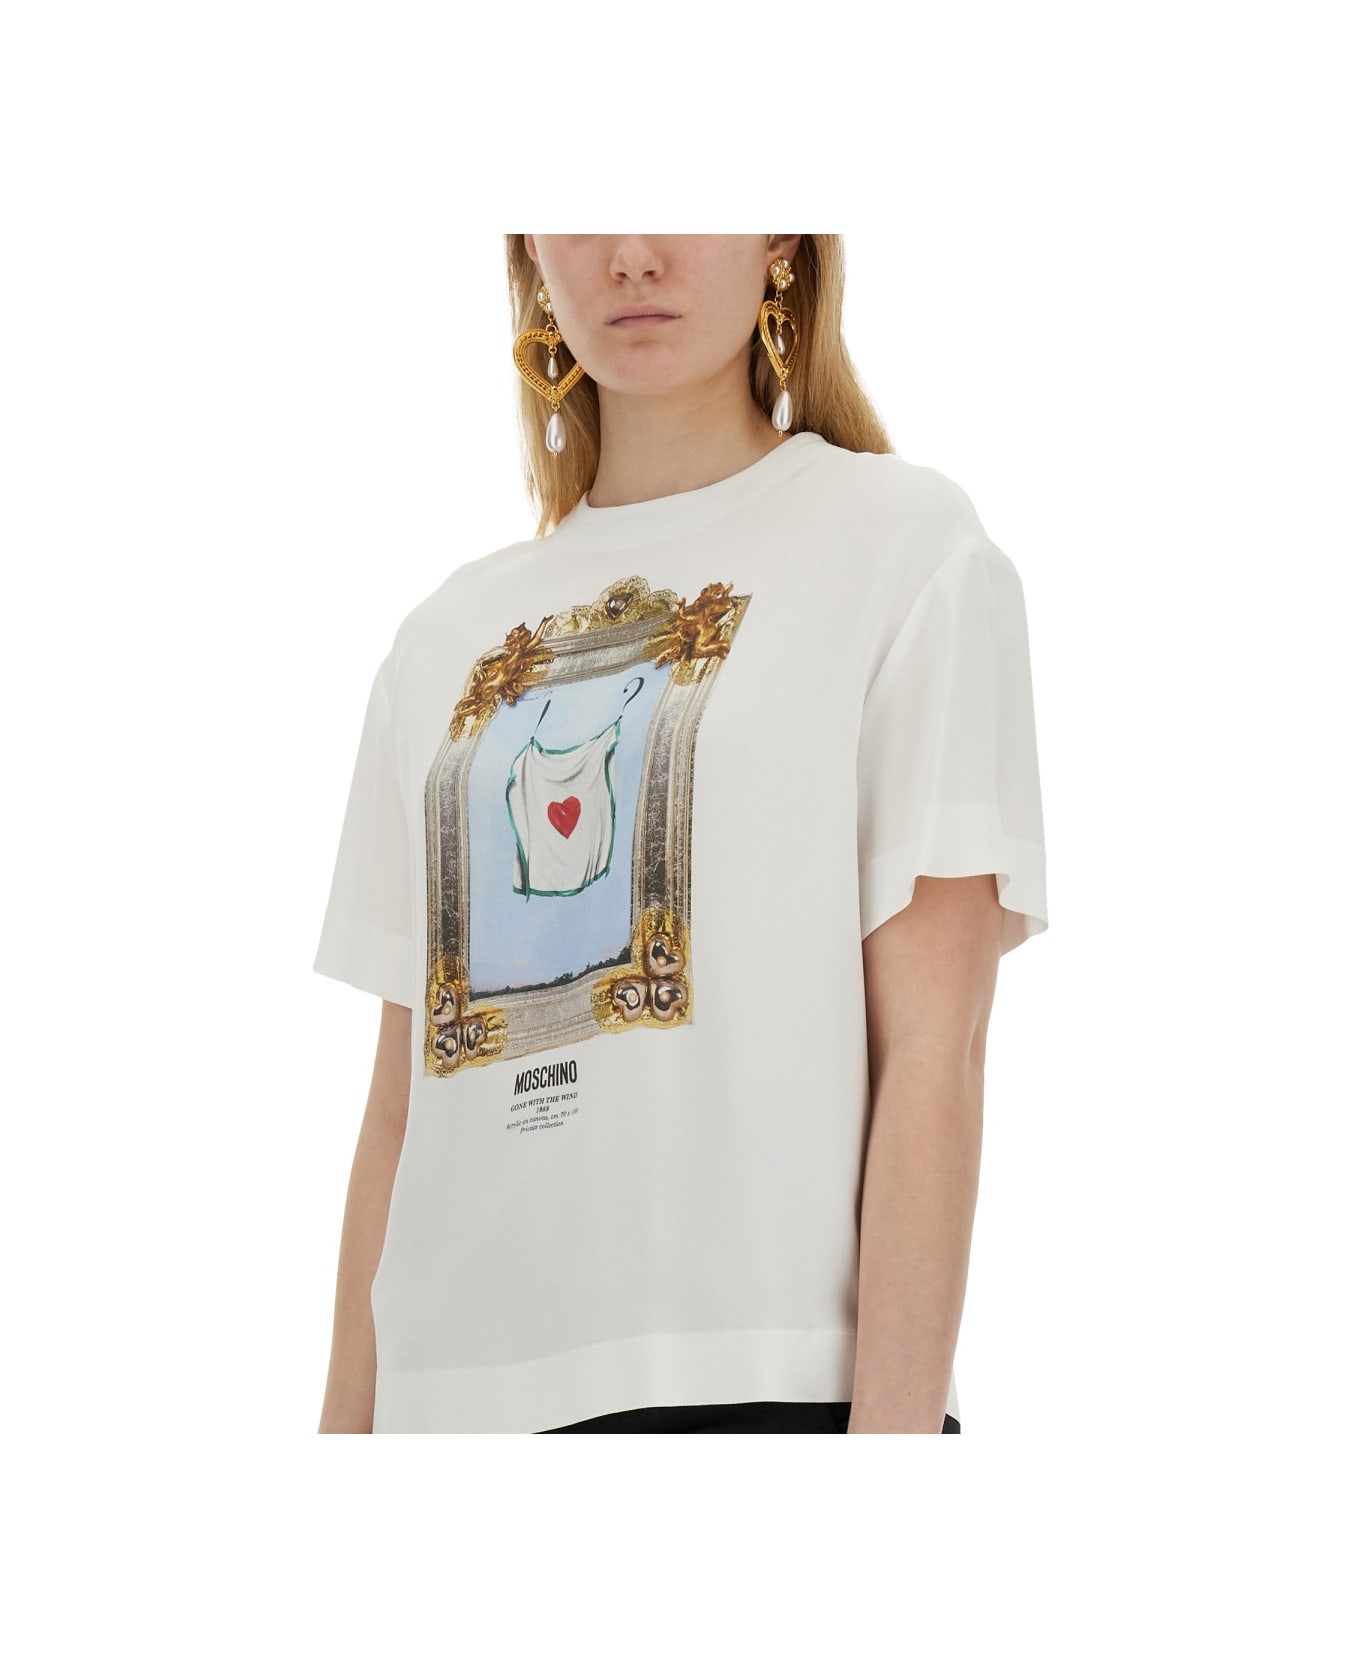 Moschino "gone With The Wind" T-shirt - WHITE Tシャツ